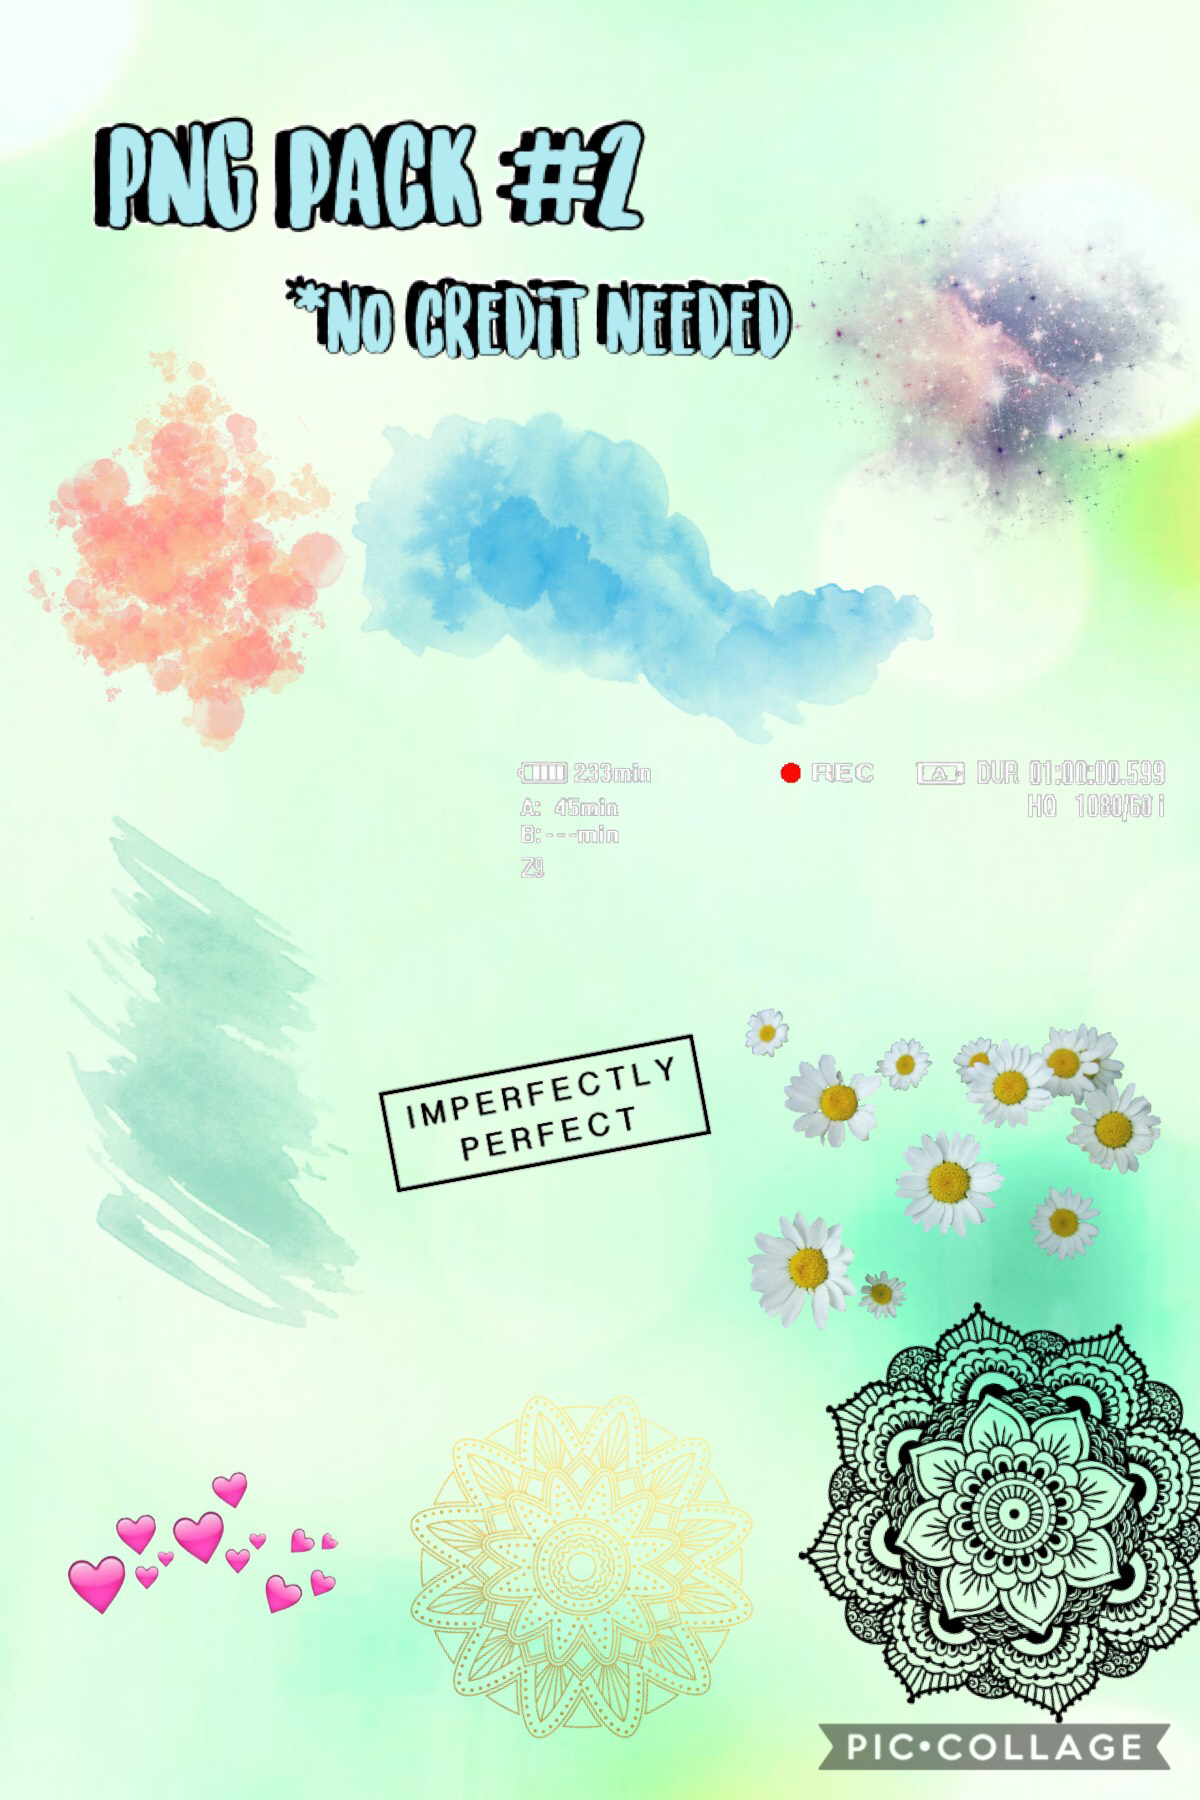 Png pack #2 💕 tap!
Hope y’all like these!! I LOVE the paint splatters and watercolors!! No credit is needed! Enjoy!!😁 